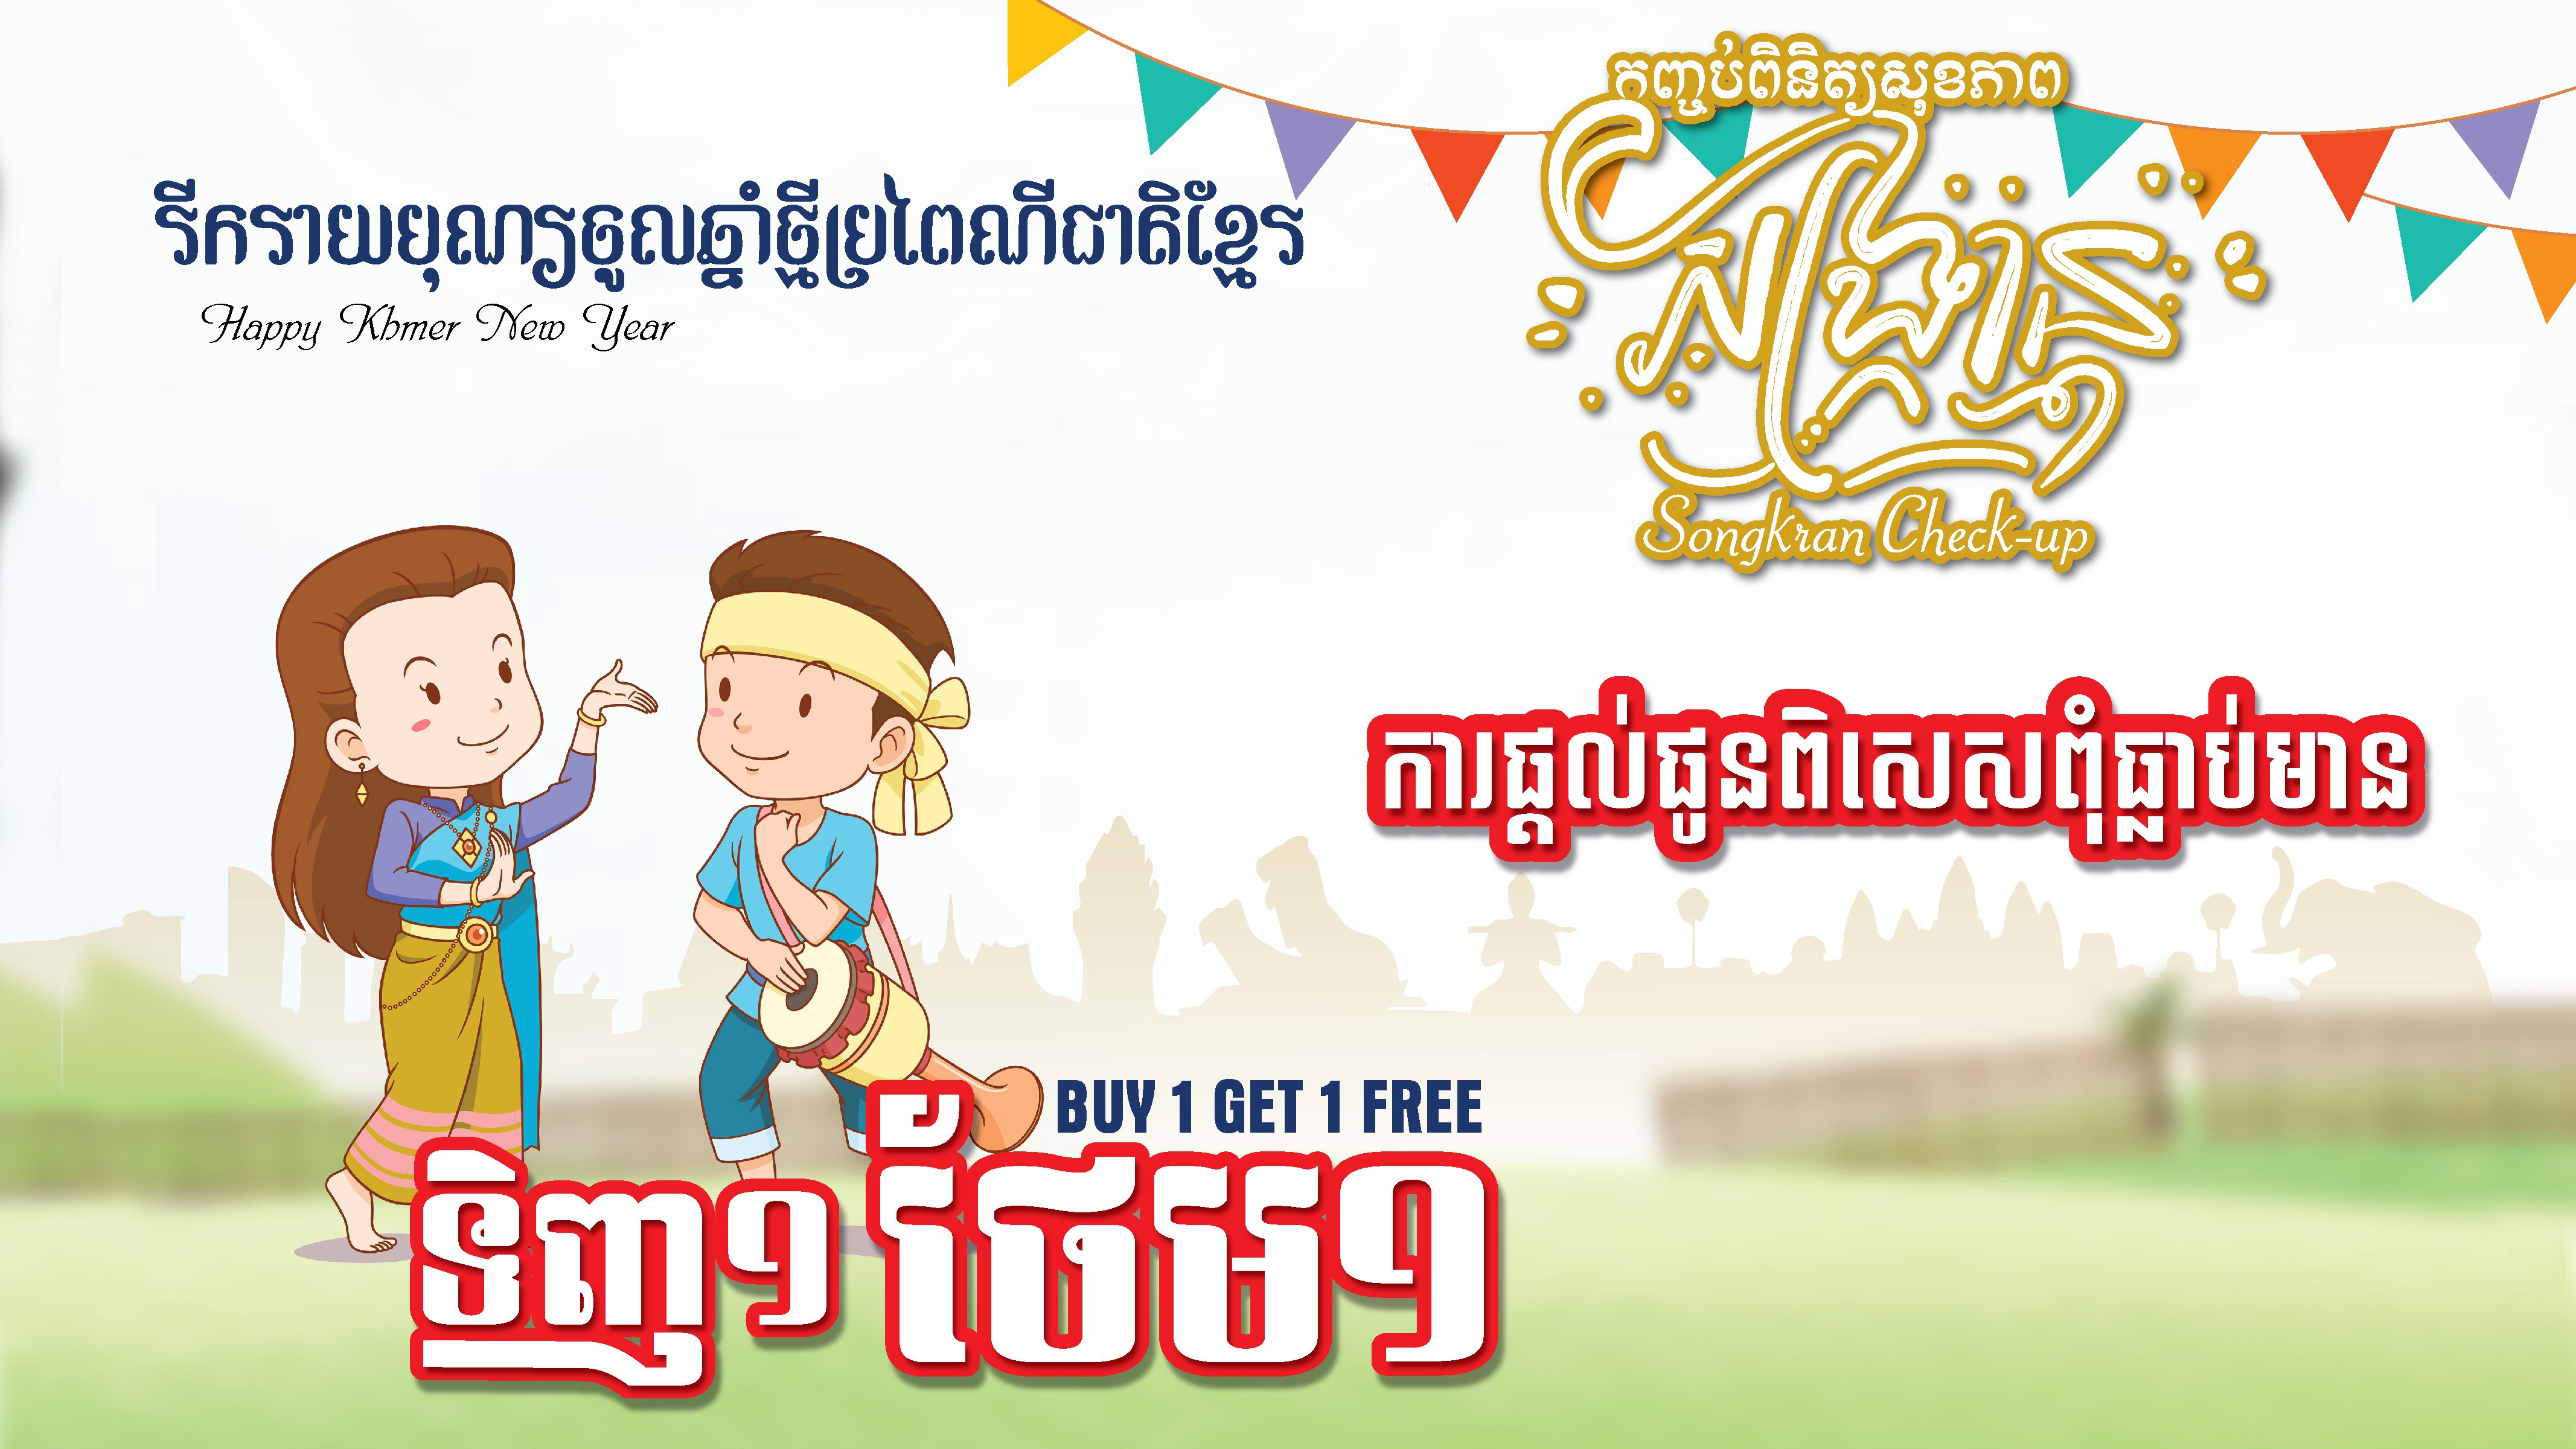 Happy Khmer New year Promtion_Buy 1 Get 1 Free